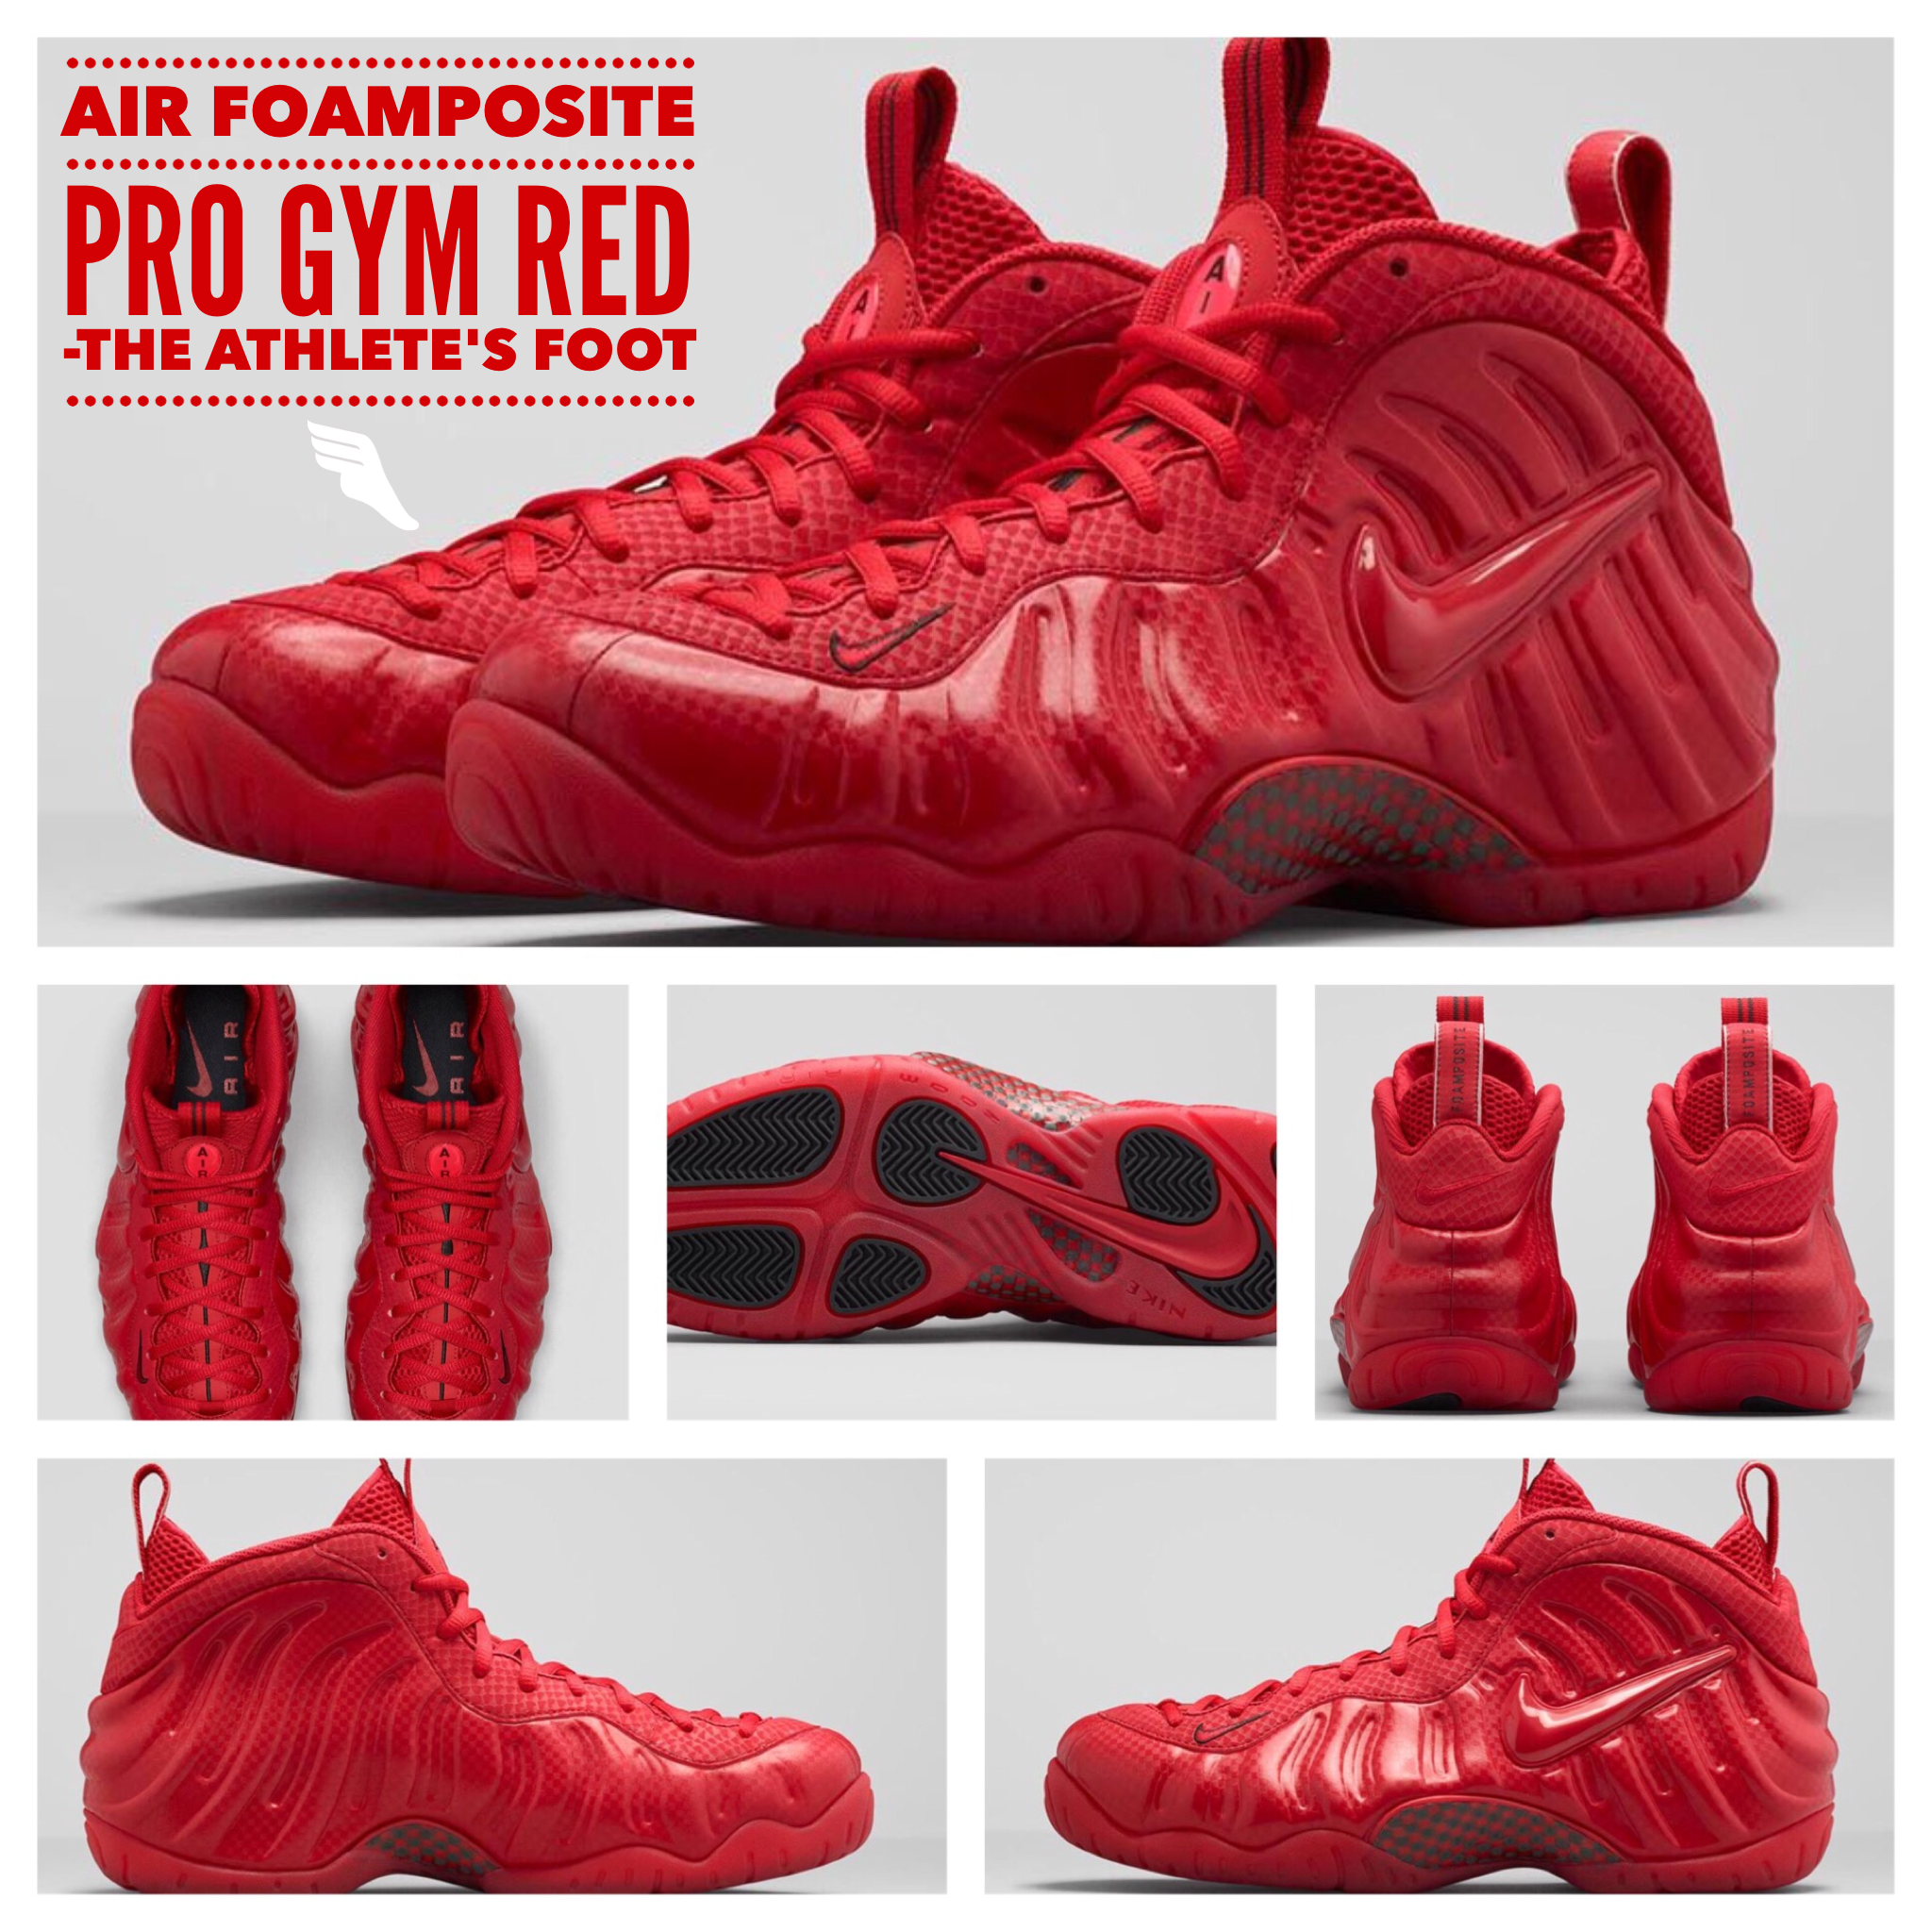 gym red foamposite release date